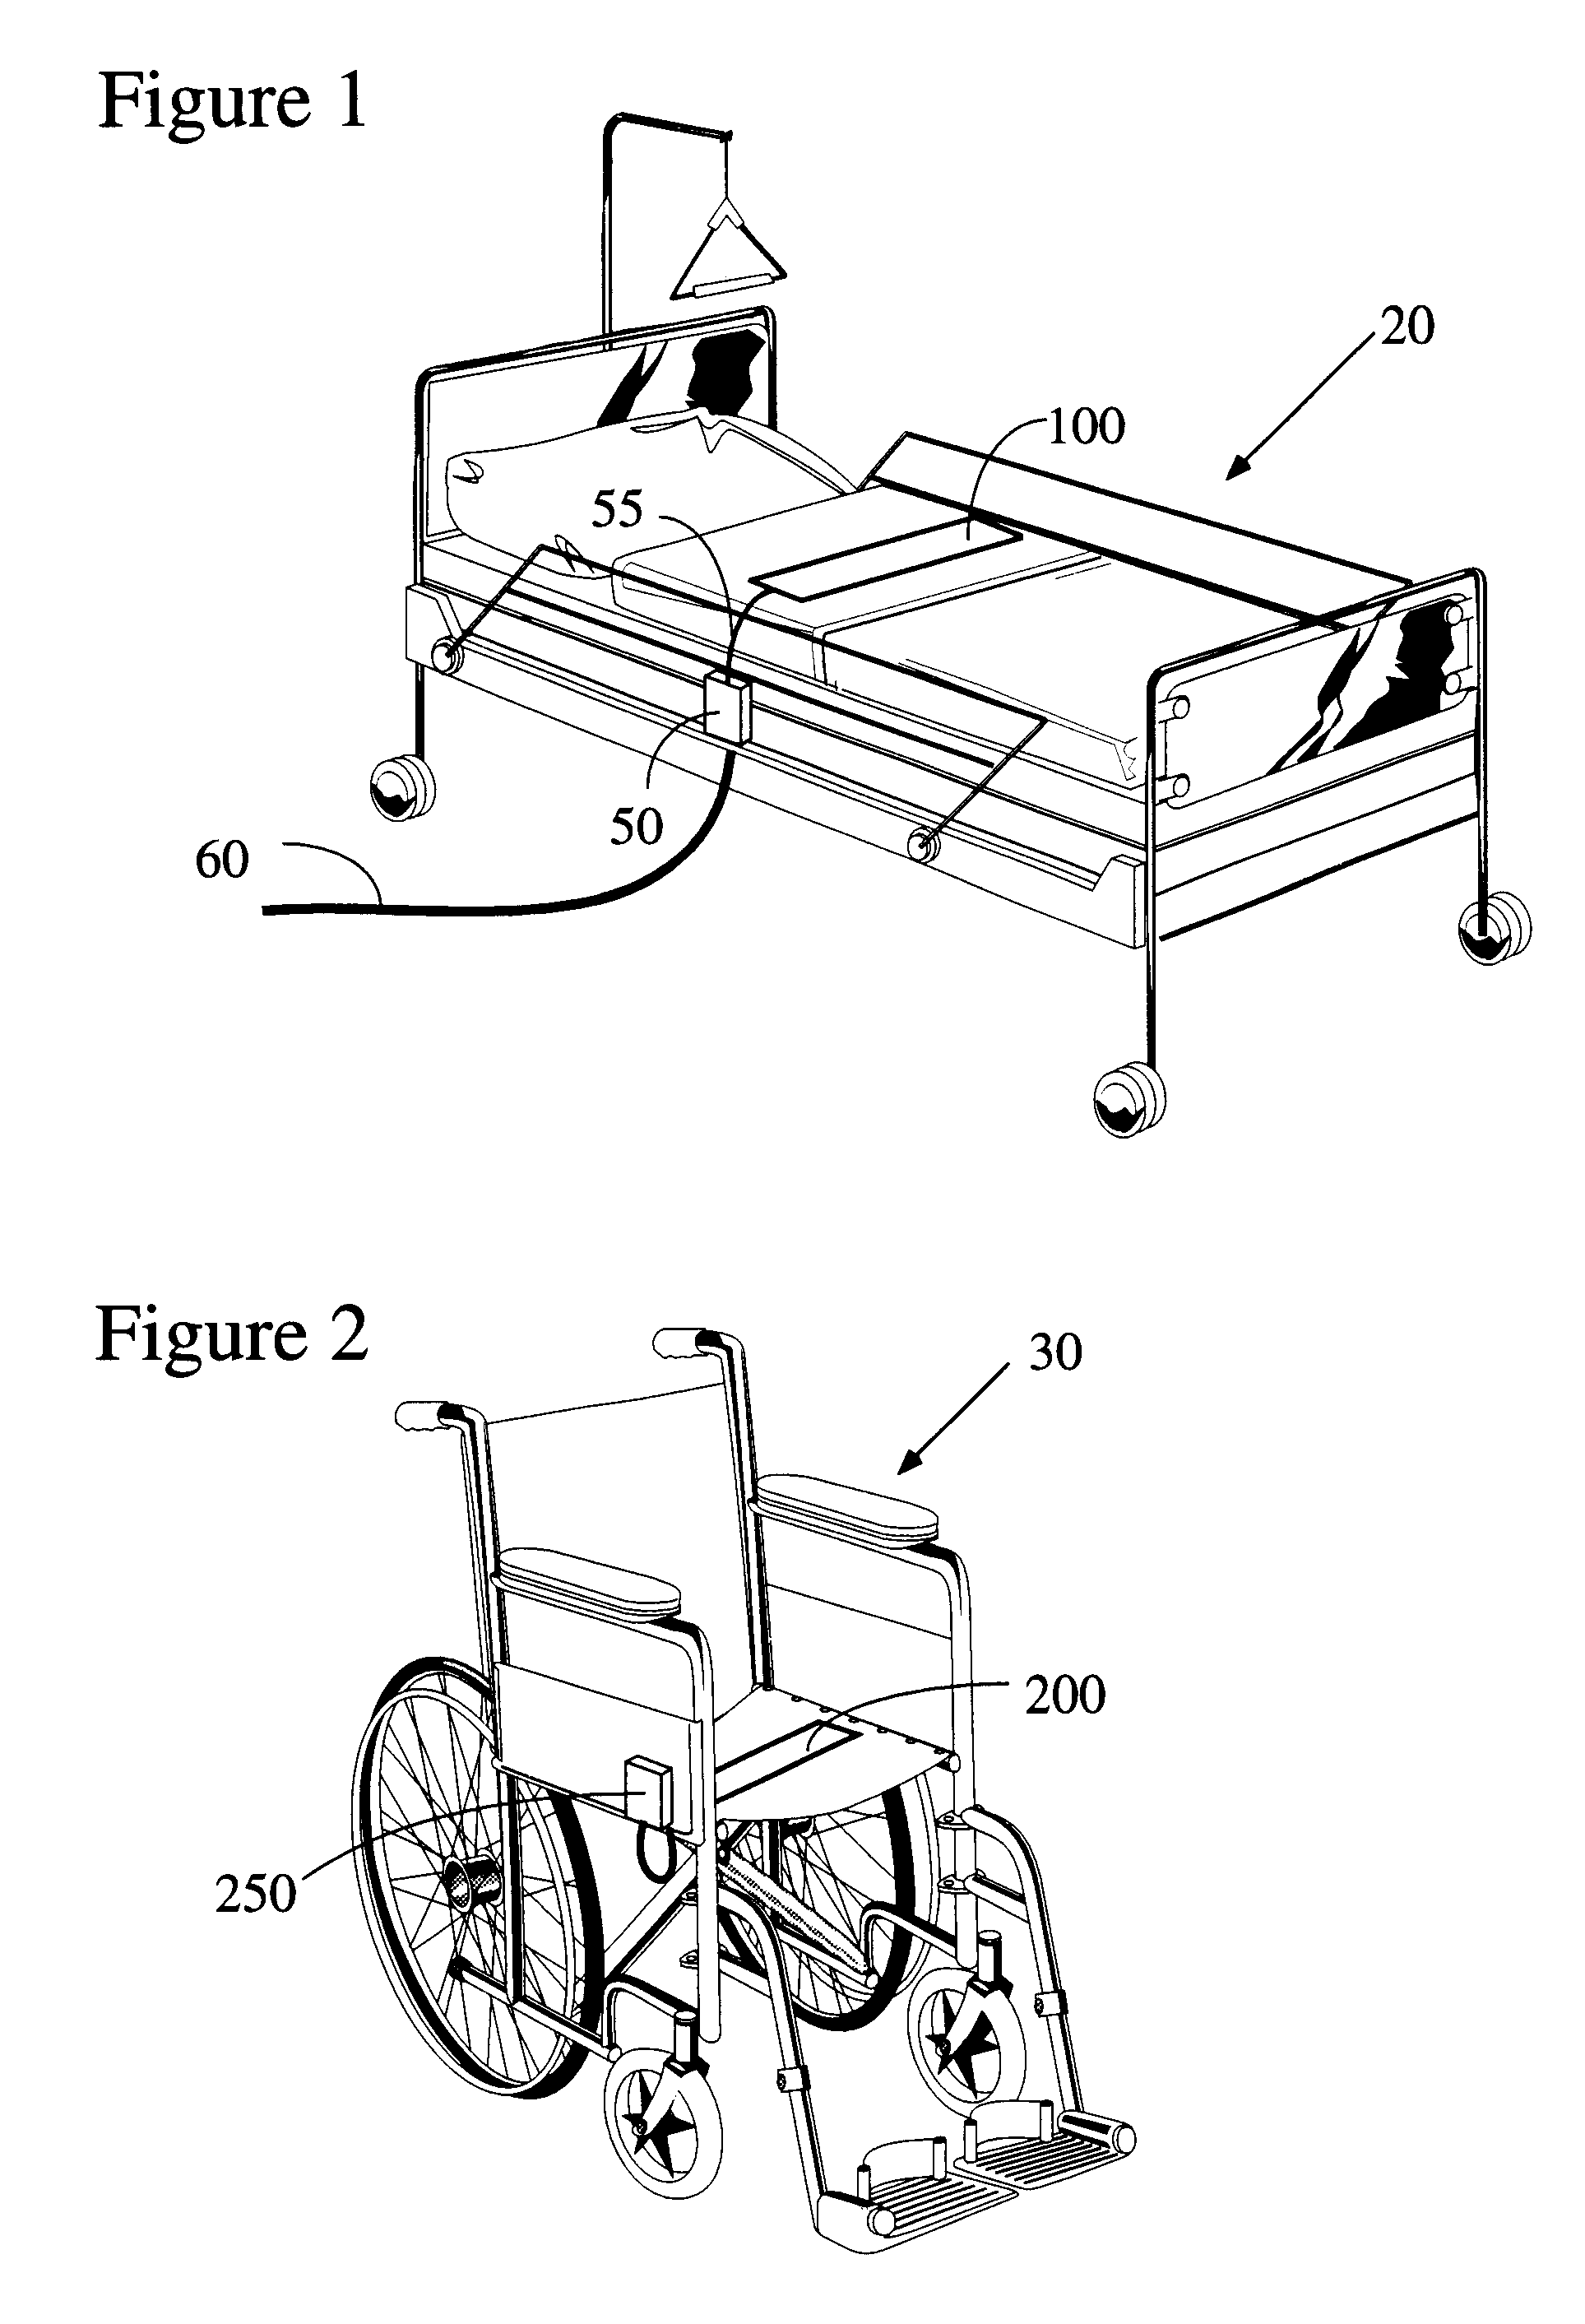 Electronic patient monitor with automatically configured alarm parameters